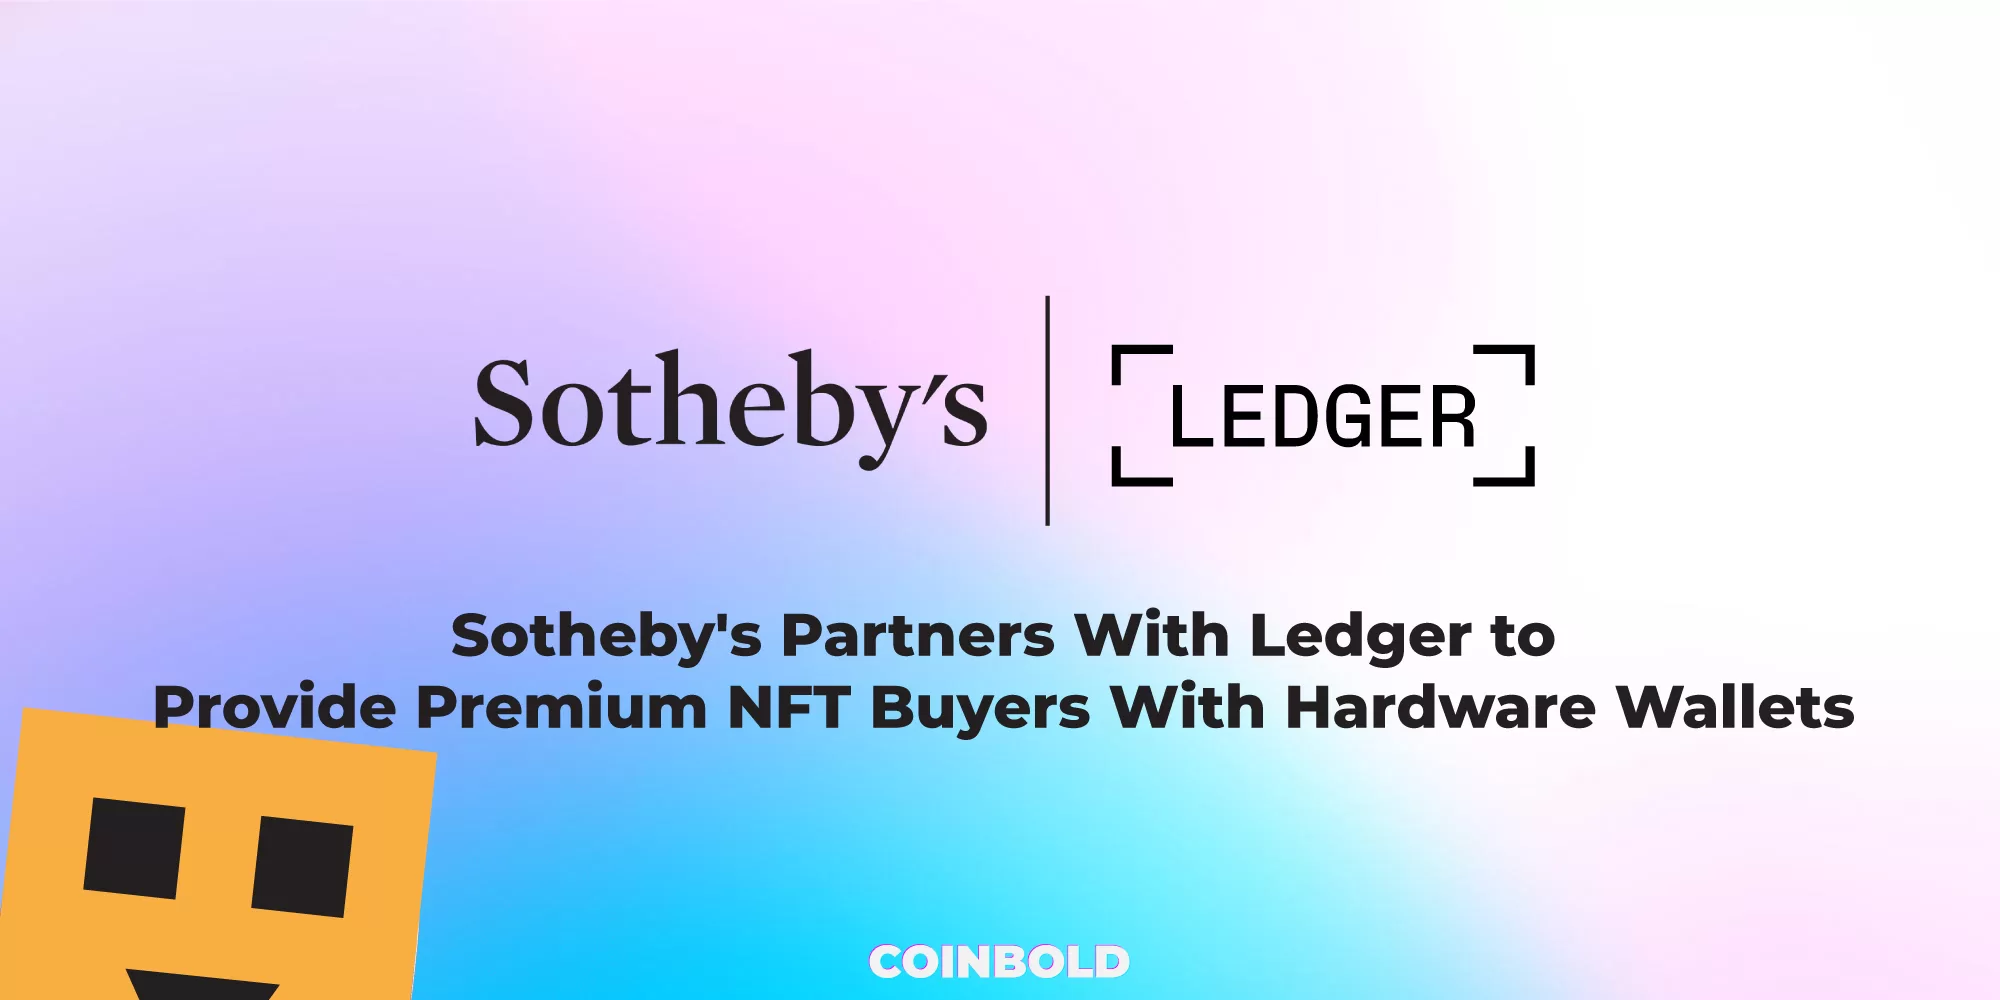 Sotheby's Partners With Ledger to Provide Premium NFT Buyers With Hardware Wallets